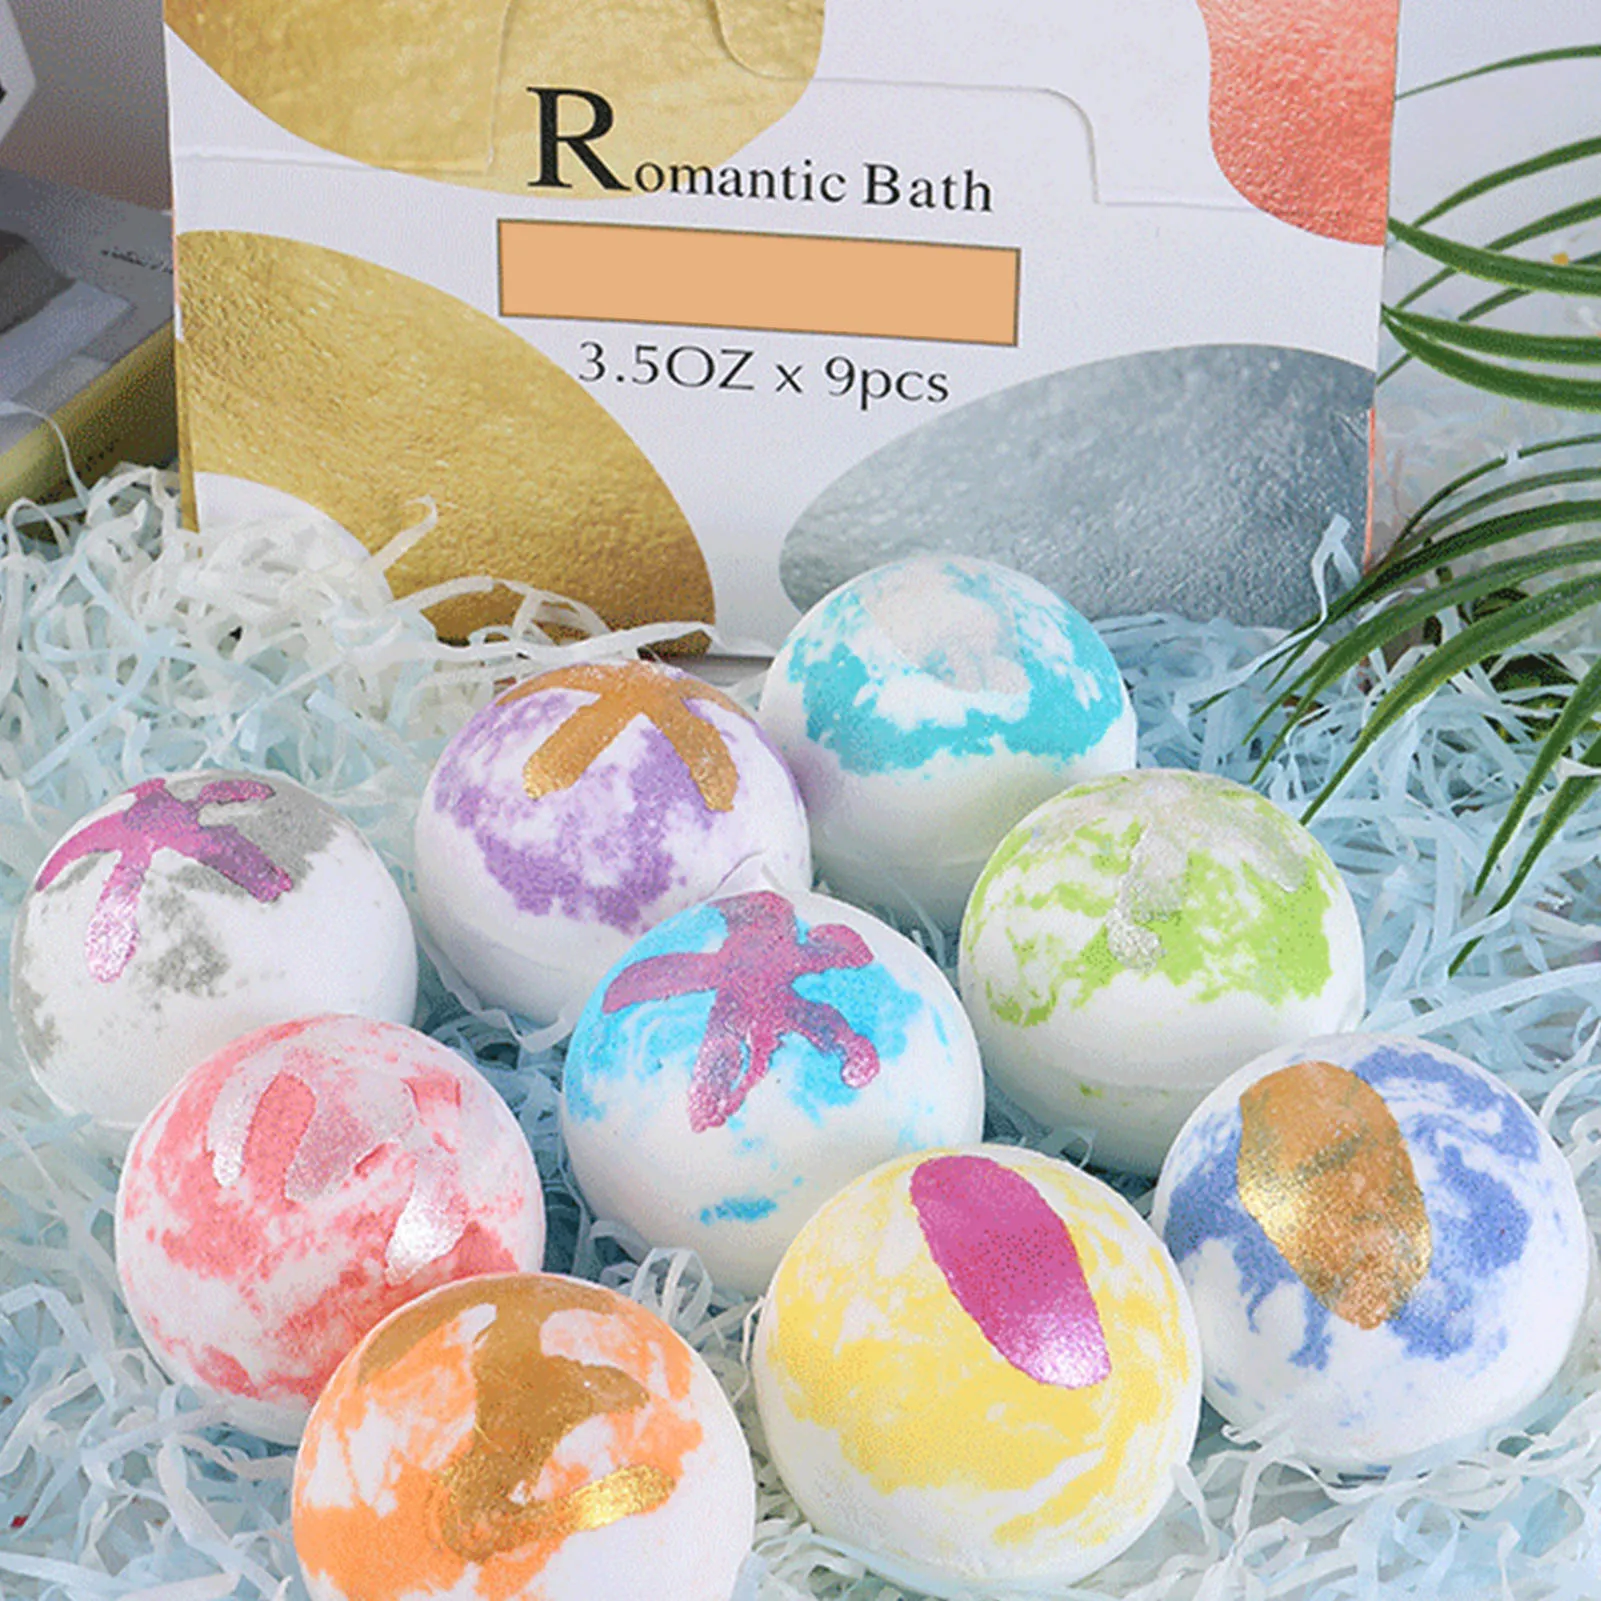 

Bath Bombs For Women Shower Bombs For Women 9pcs Aromatherapy Bath Bombs Crafted From Salt And Essential Oils Fizzy Spa Relaxing